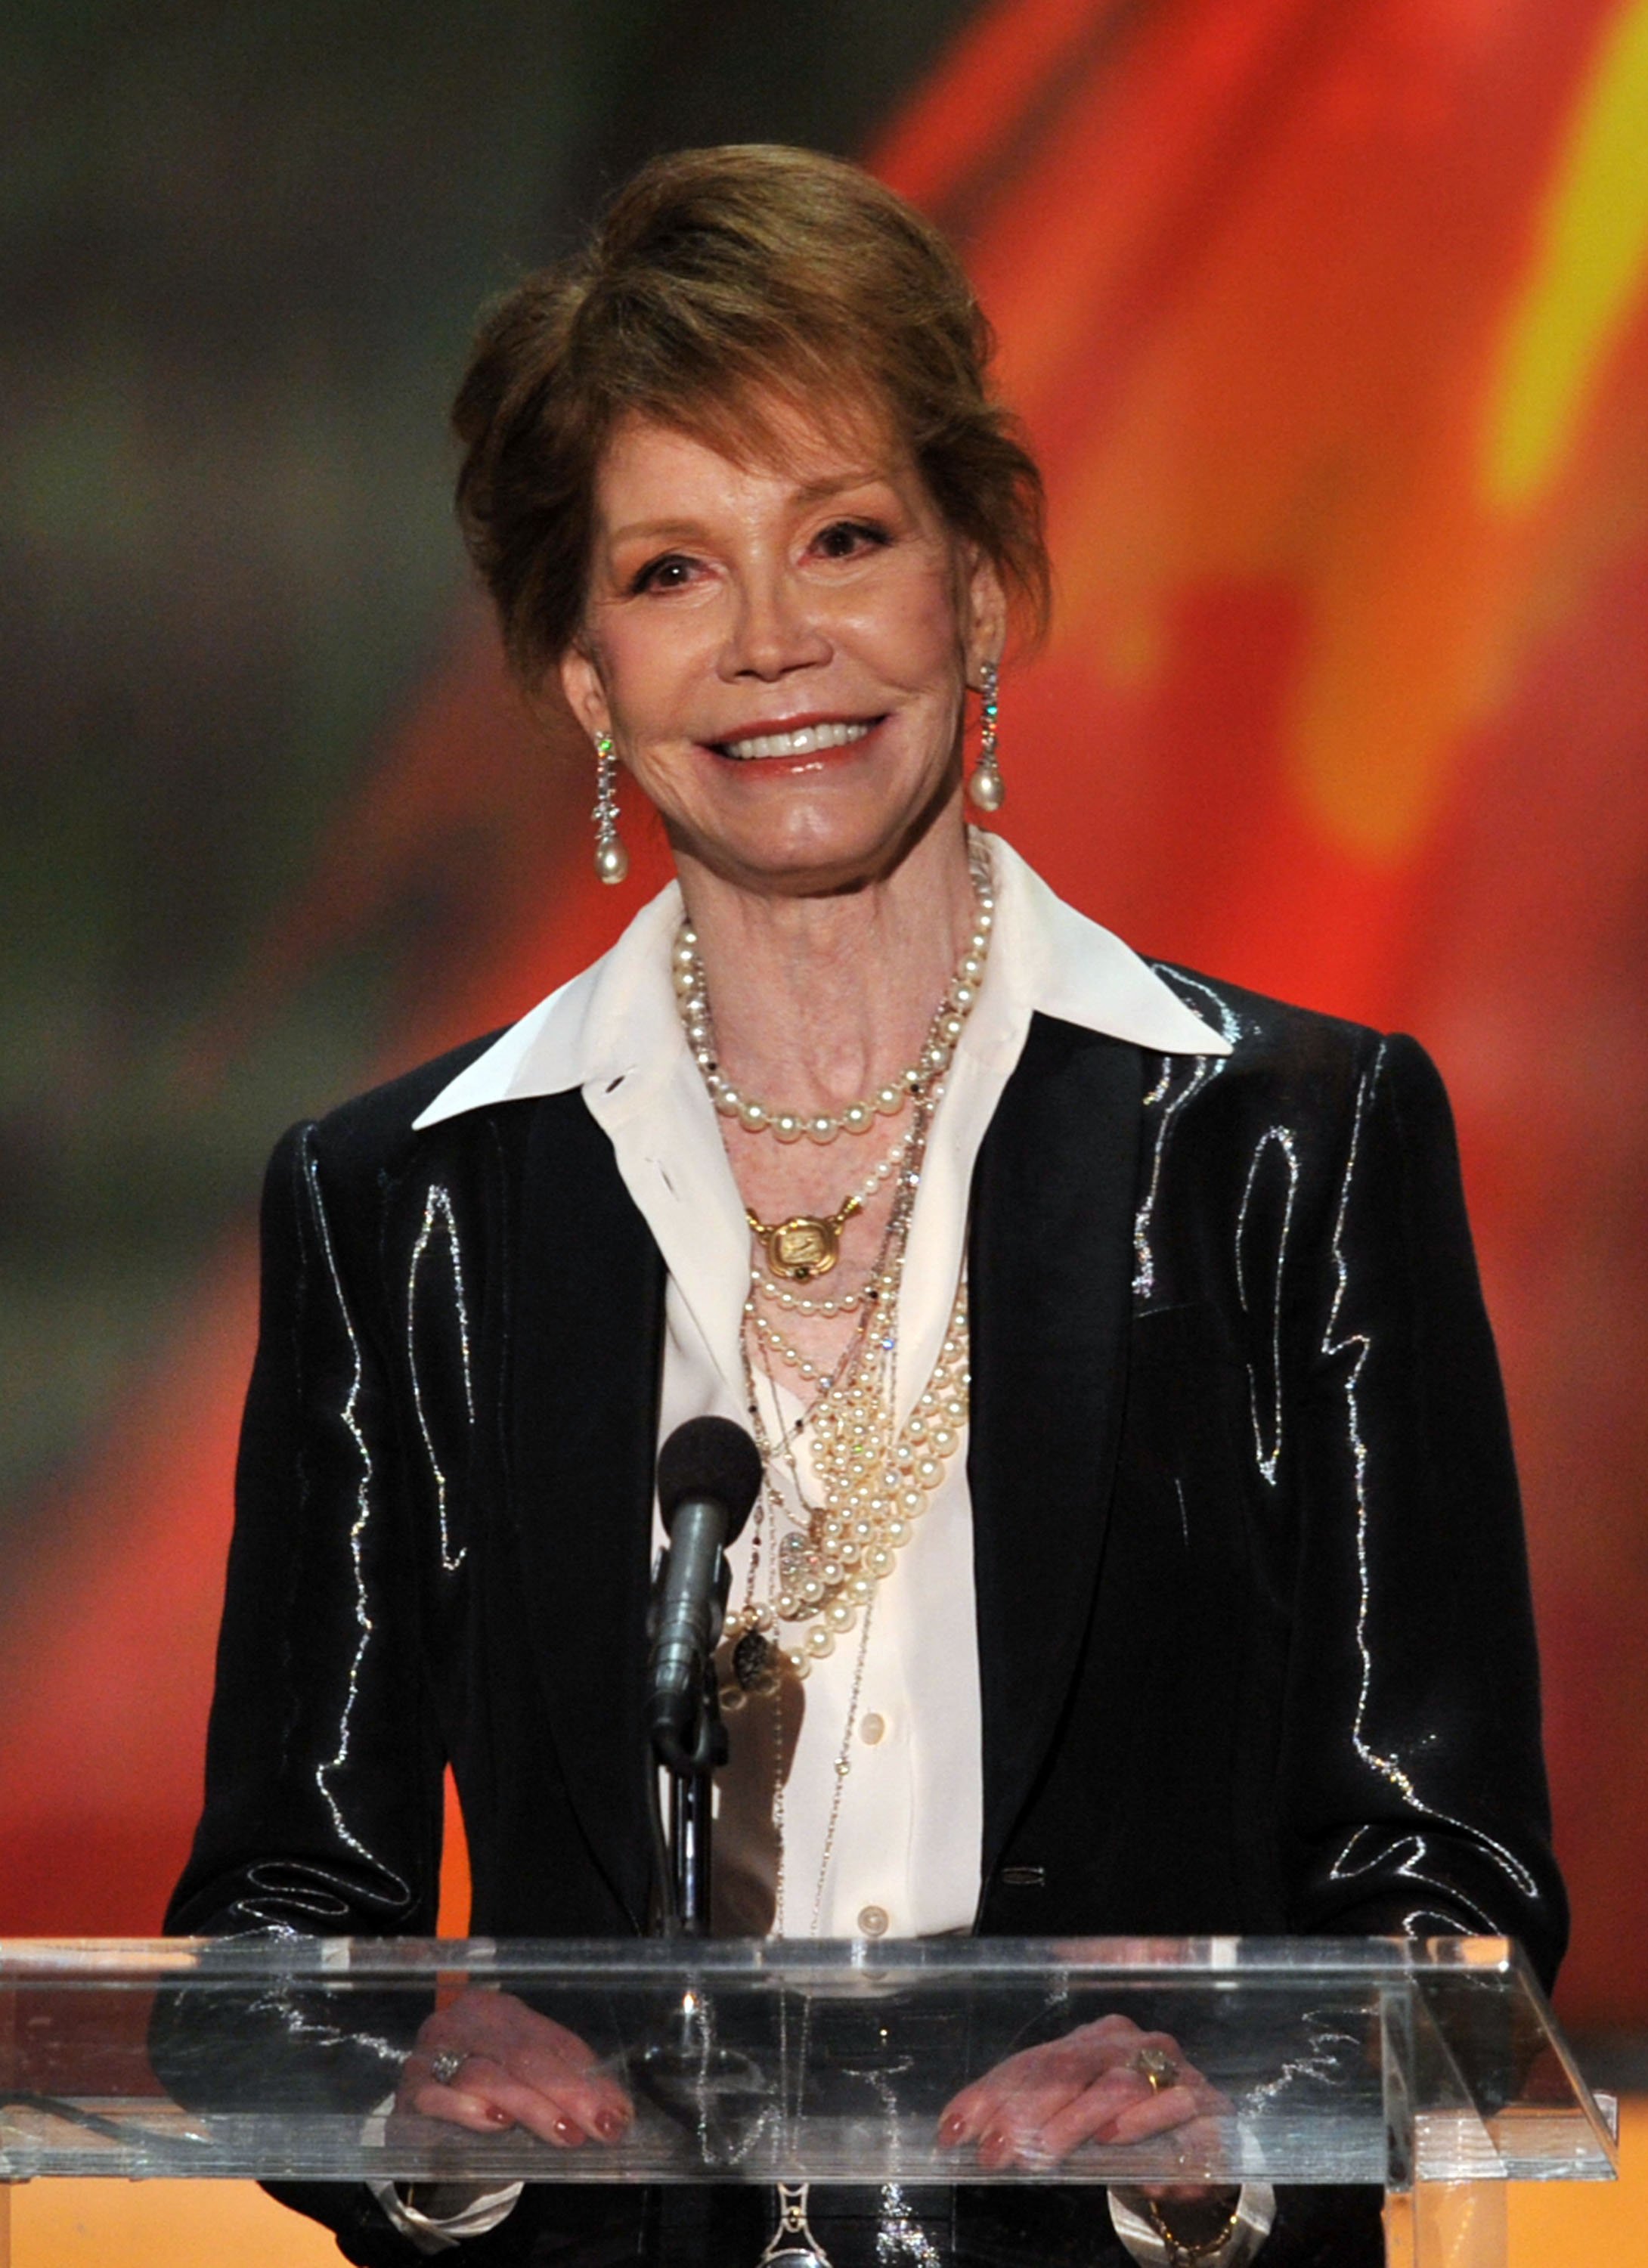 Mary Tyler Moore accepts the Life Achievement Award on January 29, 2012, in Los Angeles, California. | Source: Getty Images.